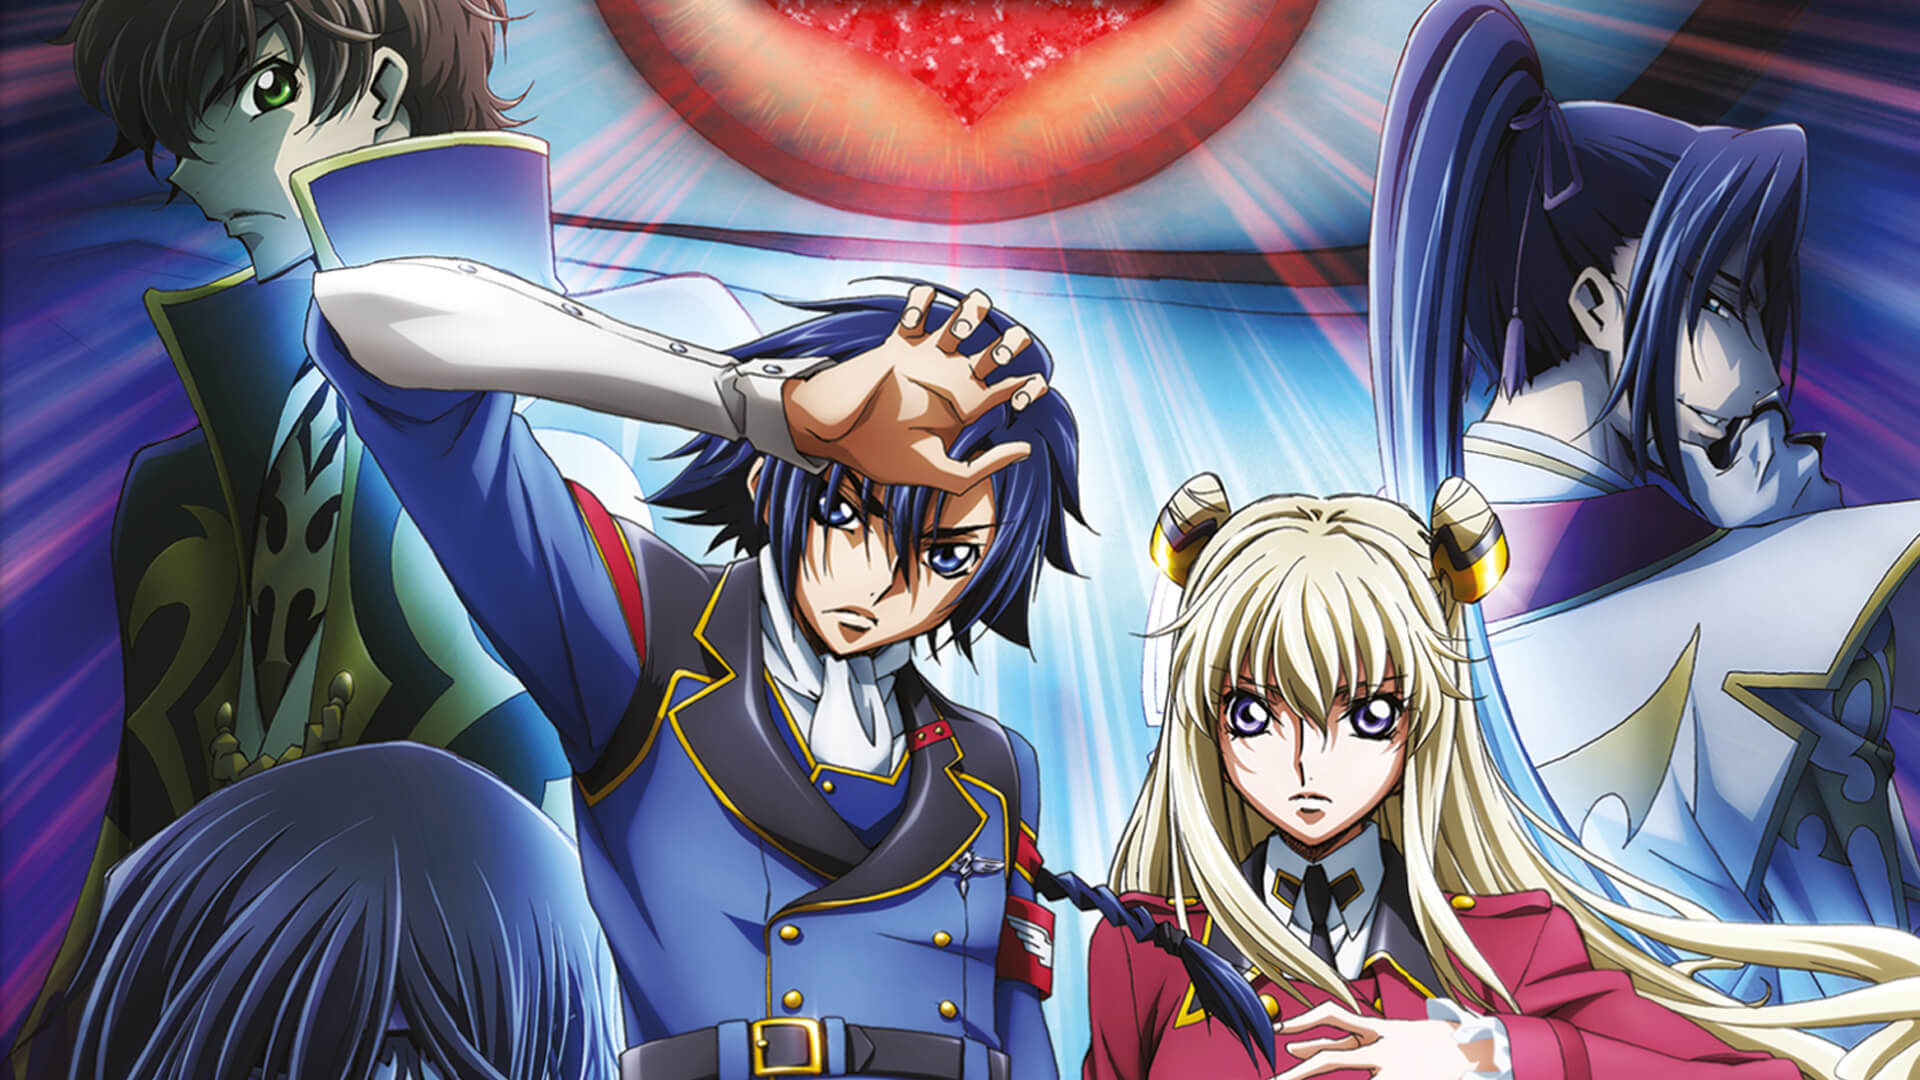 Code Geass Akito The Exiled